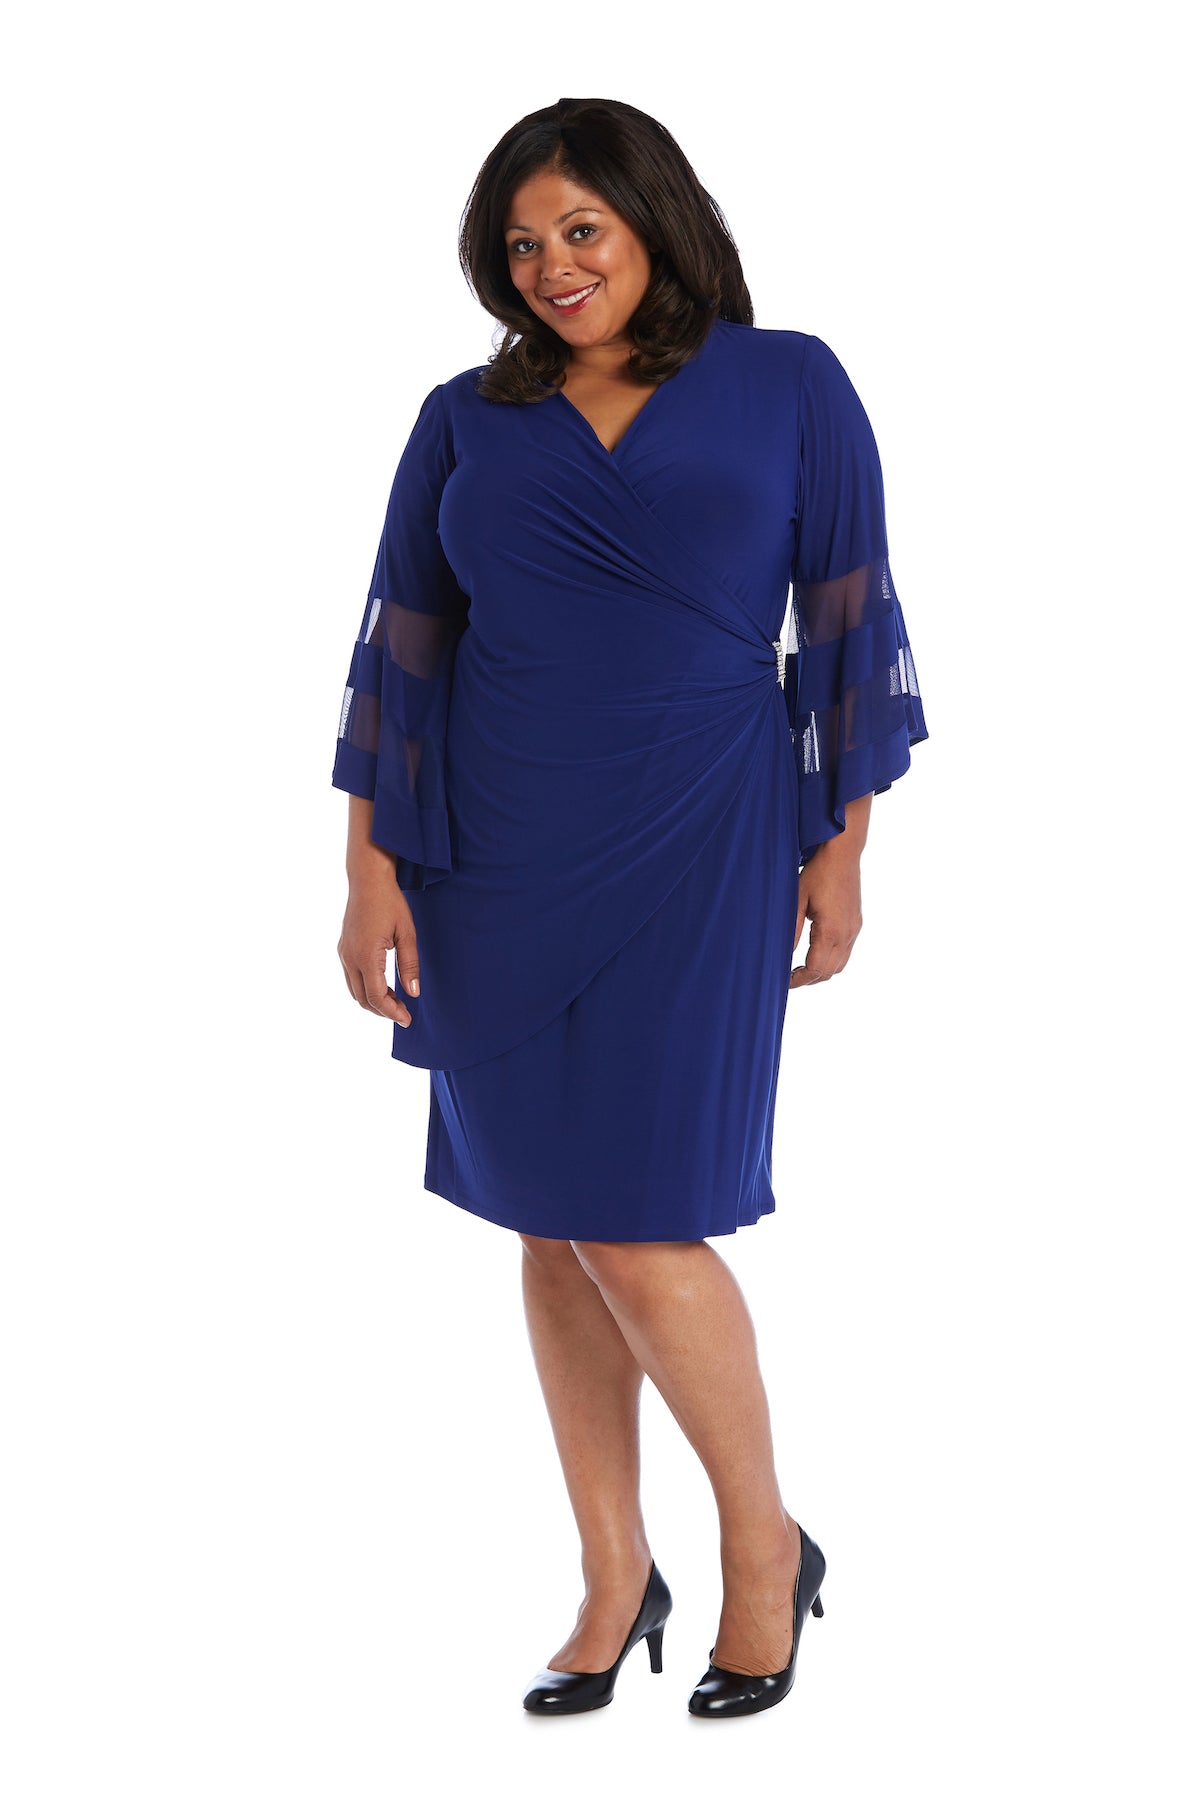 Women Plus Size Flattering Knee-Length Wraparound Dress with Bell-Sleeves